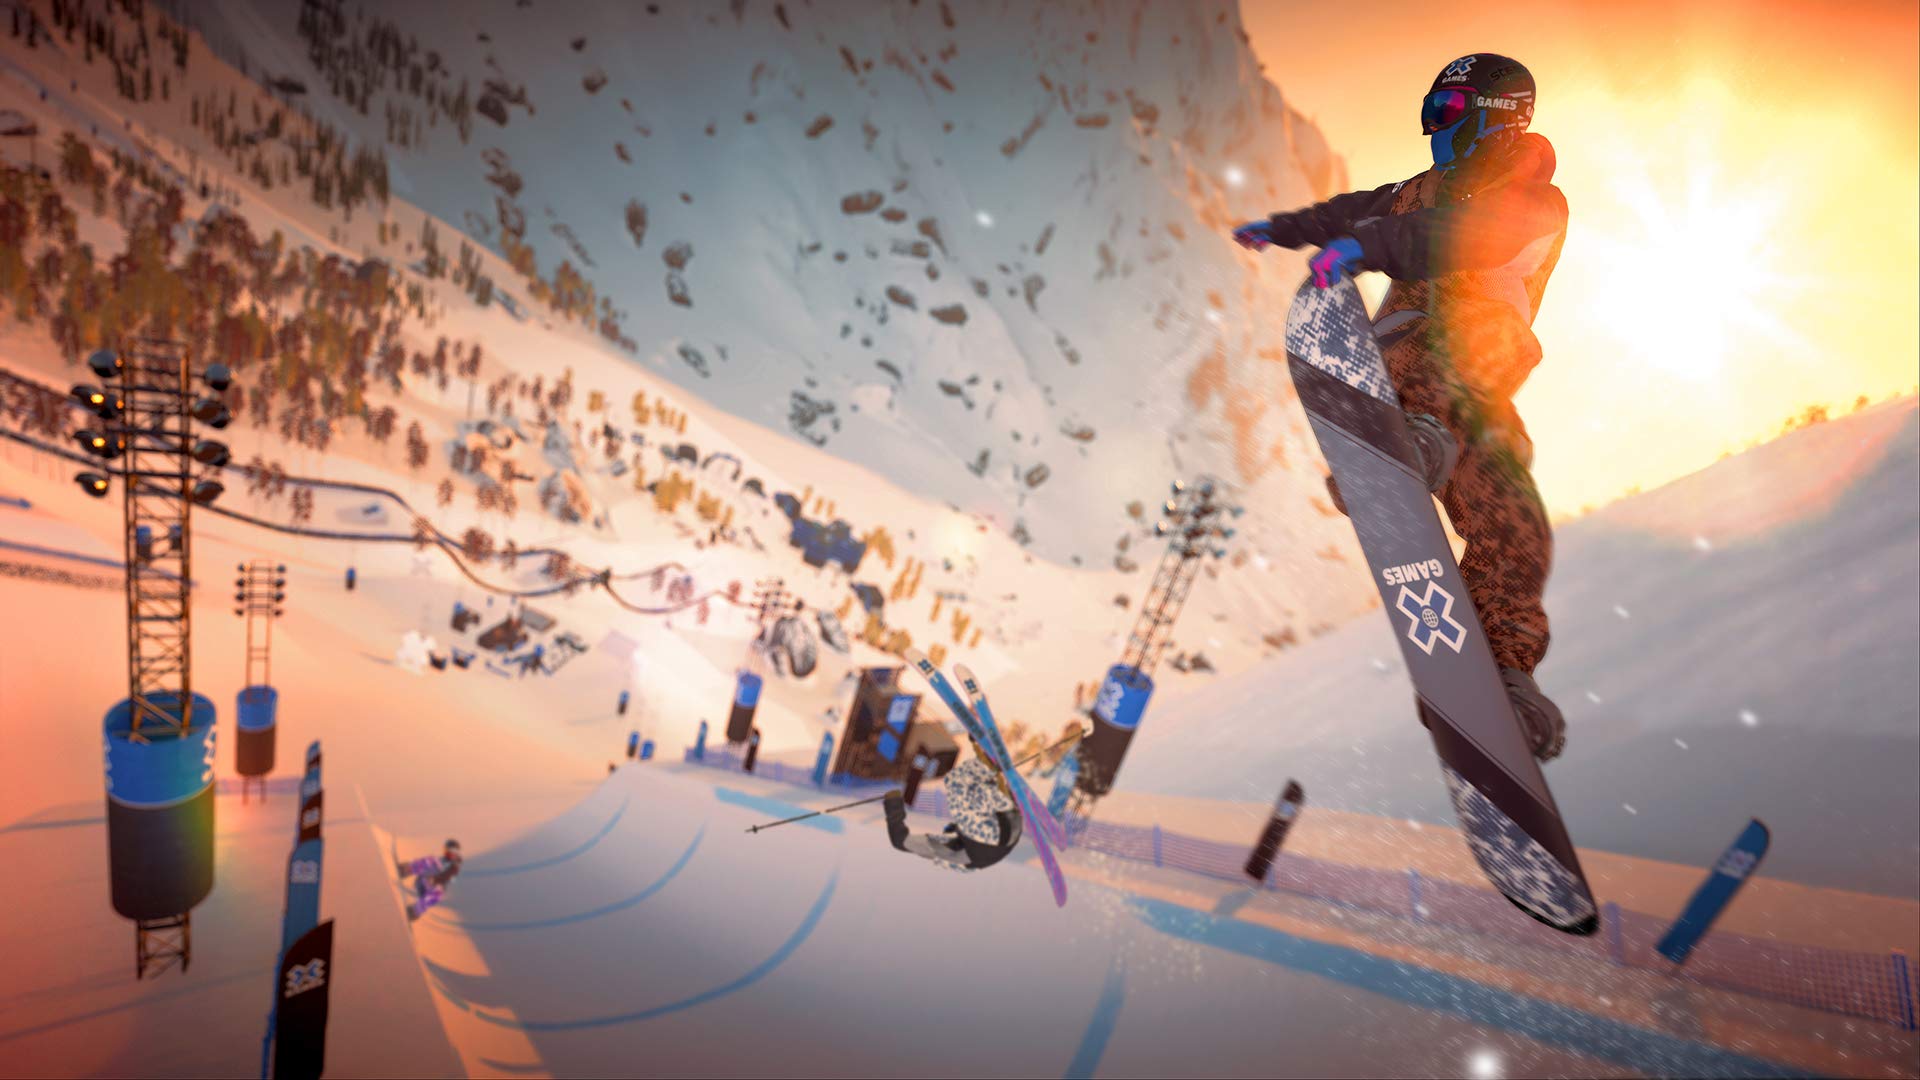 Steep X Games Gold Edition | PC Code - Ubisoft Connect